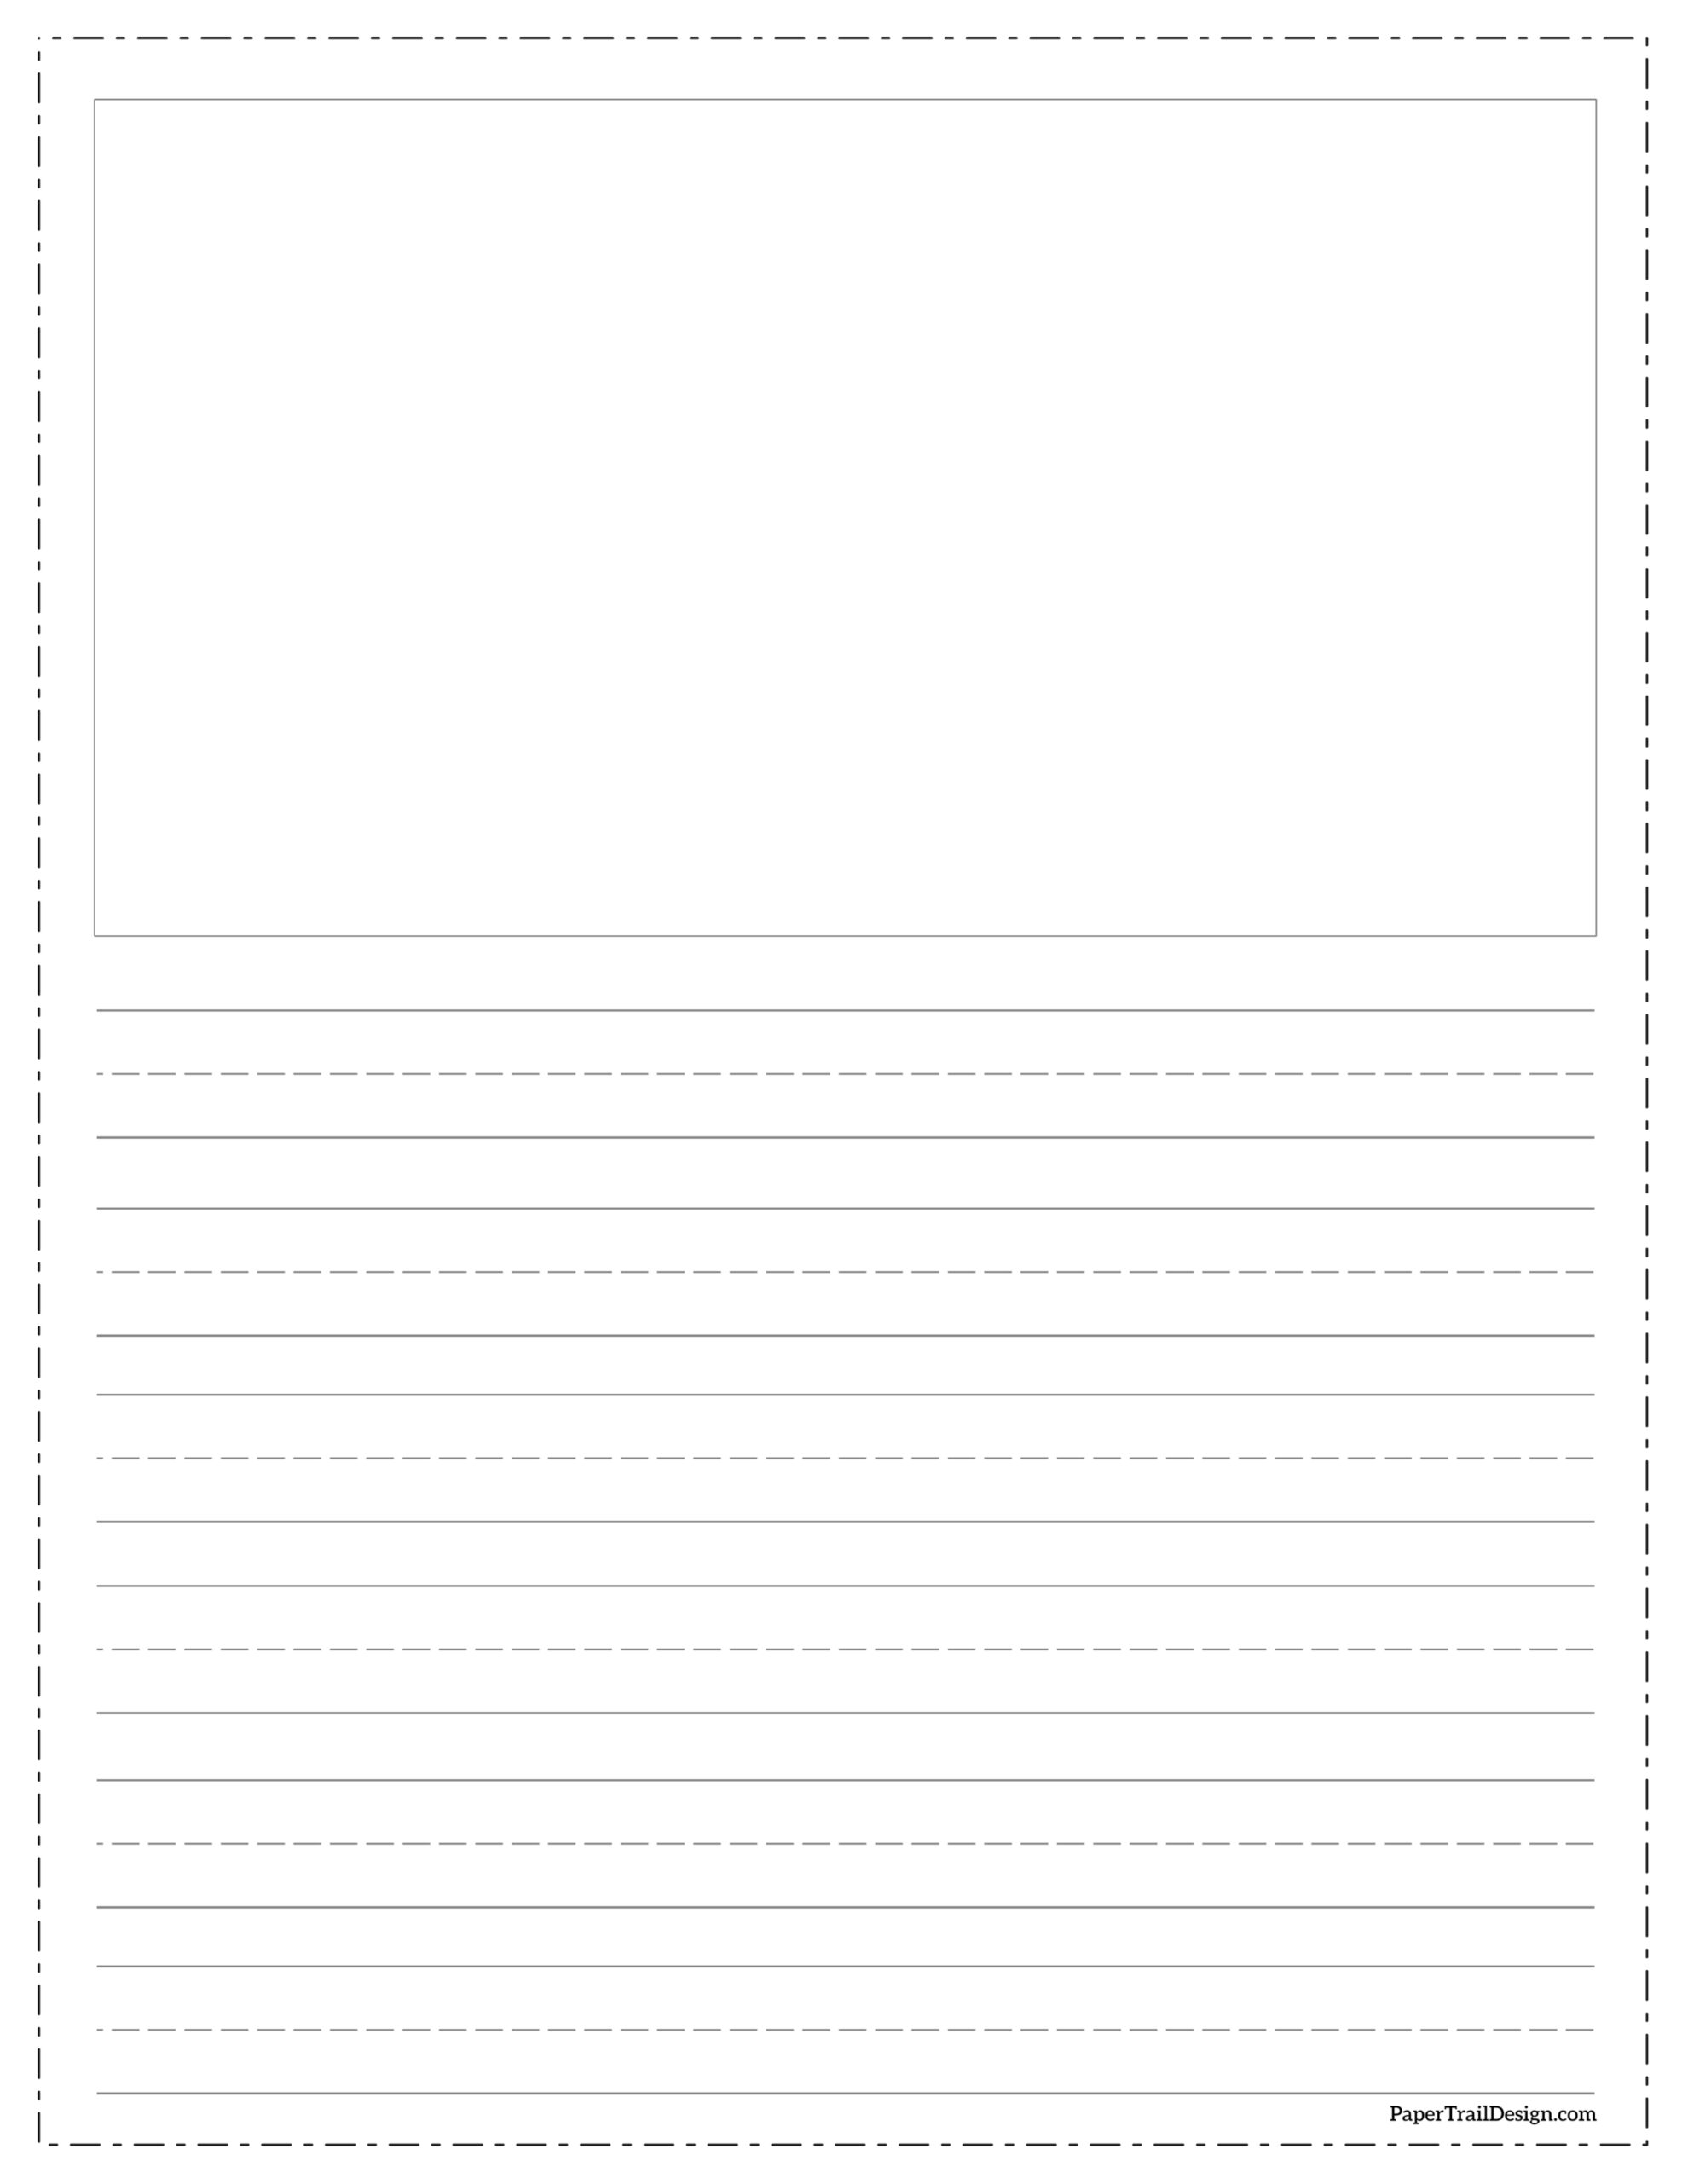 writing-paper-printable-stationery-writing-paper-printable-printable